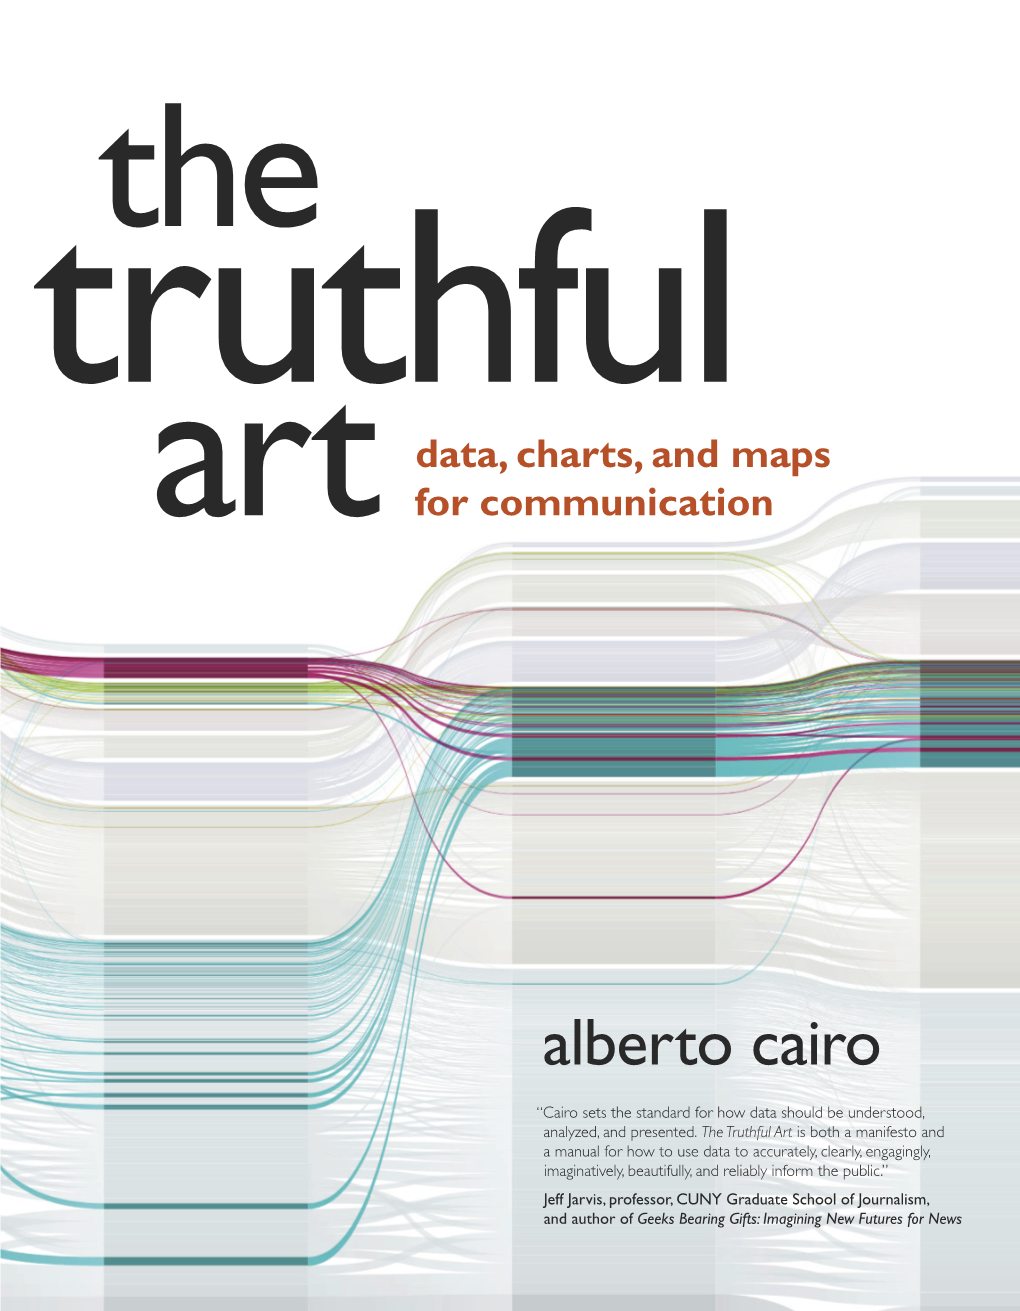 The Truthful Data, Charts, and Maps Art for Communication